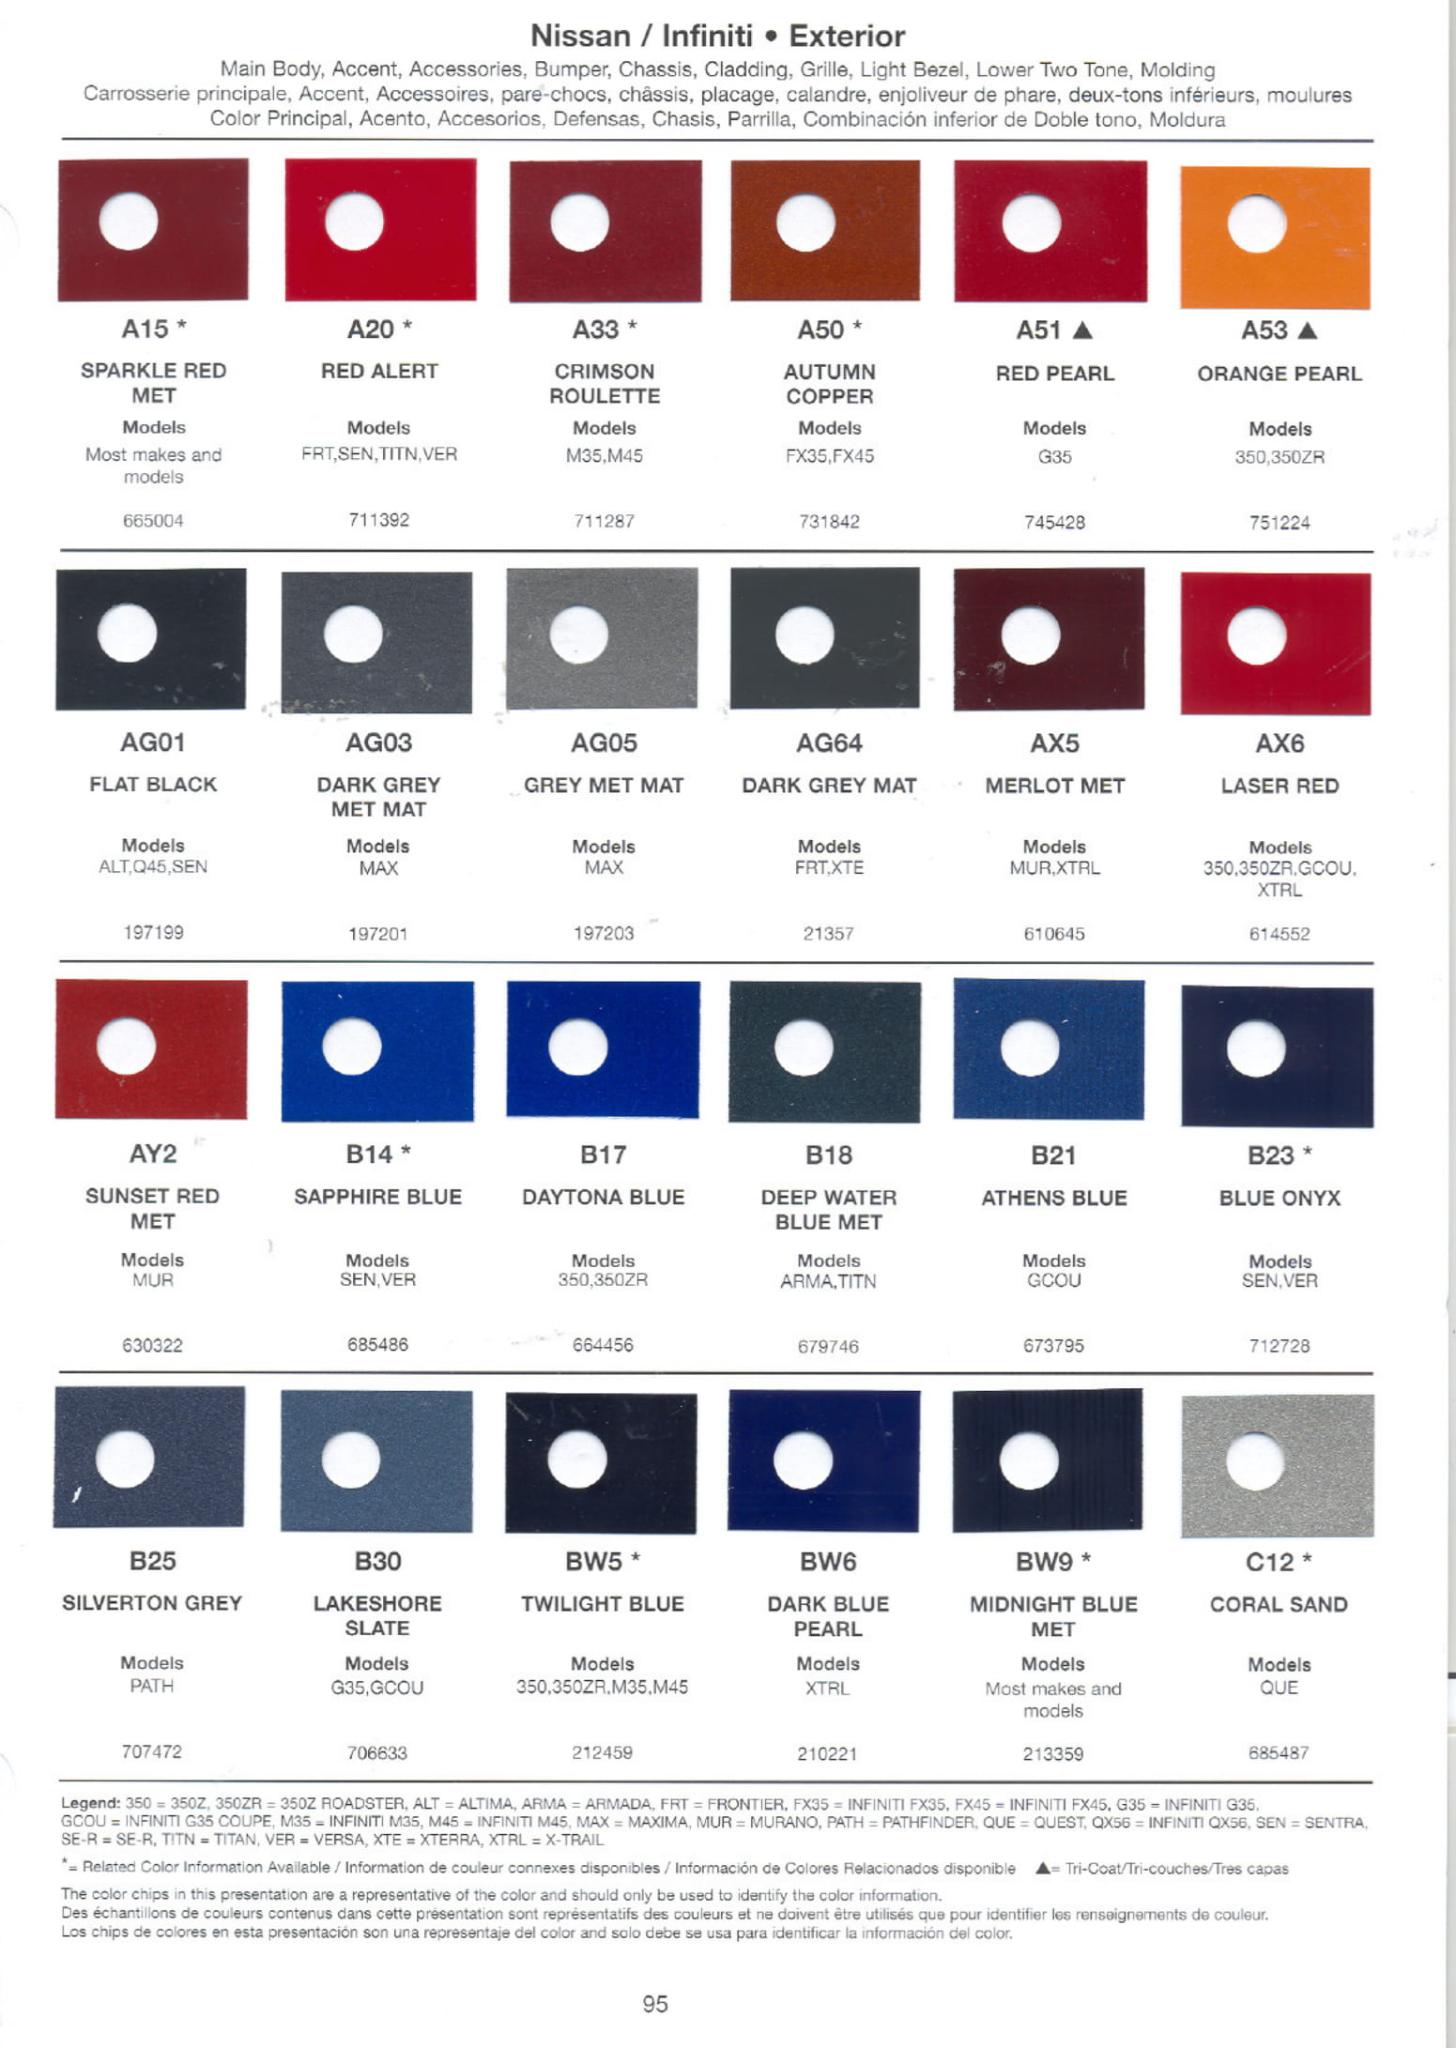 2007 Nissan and Infinity Exterior Color Code and Paint Swatch Chart